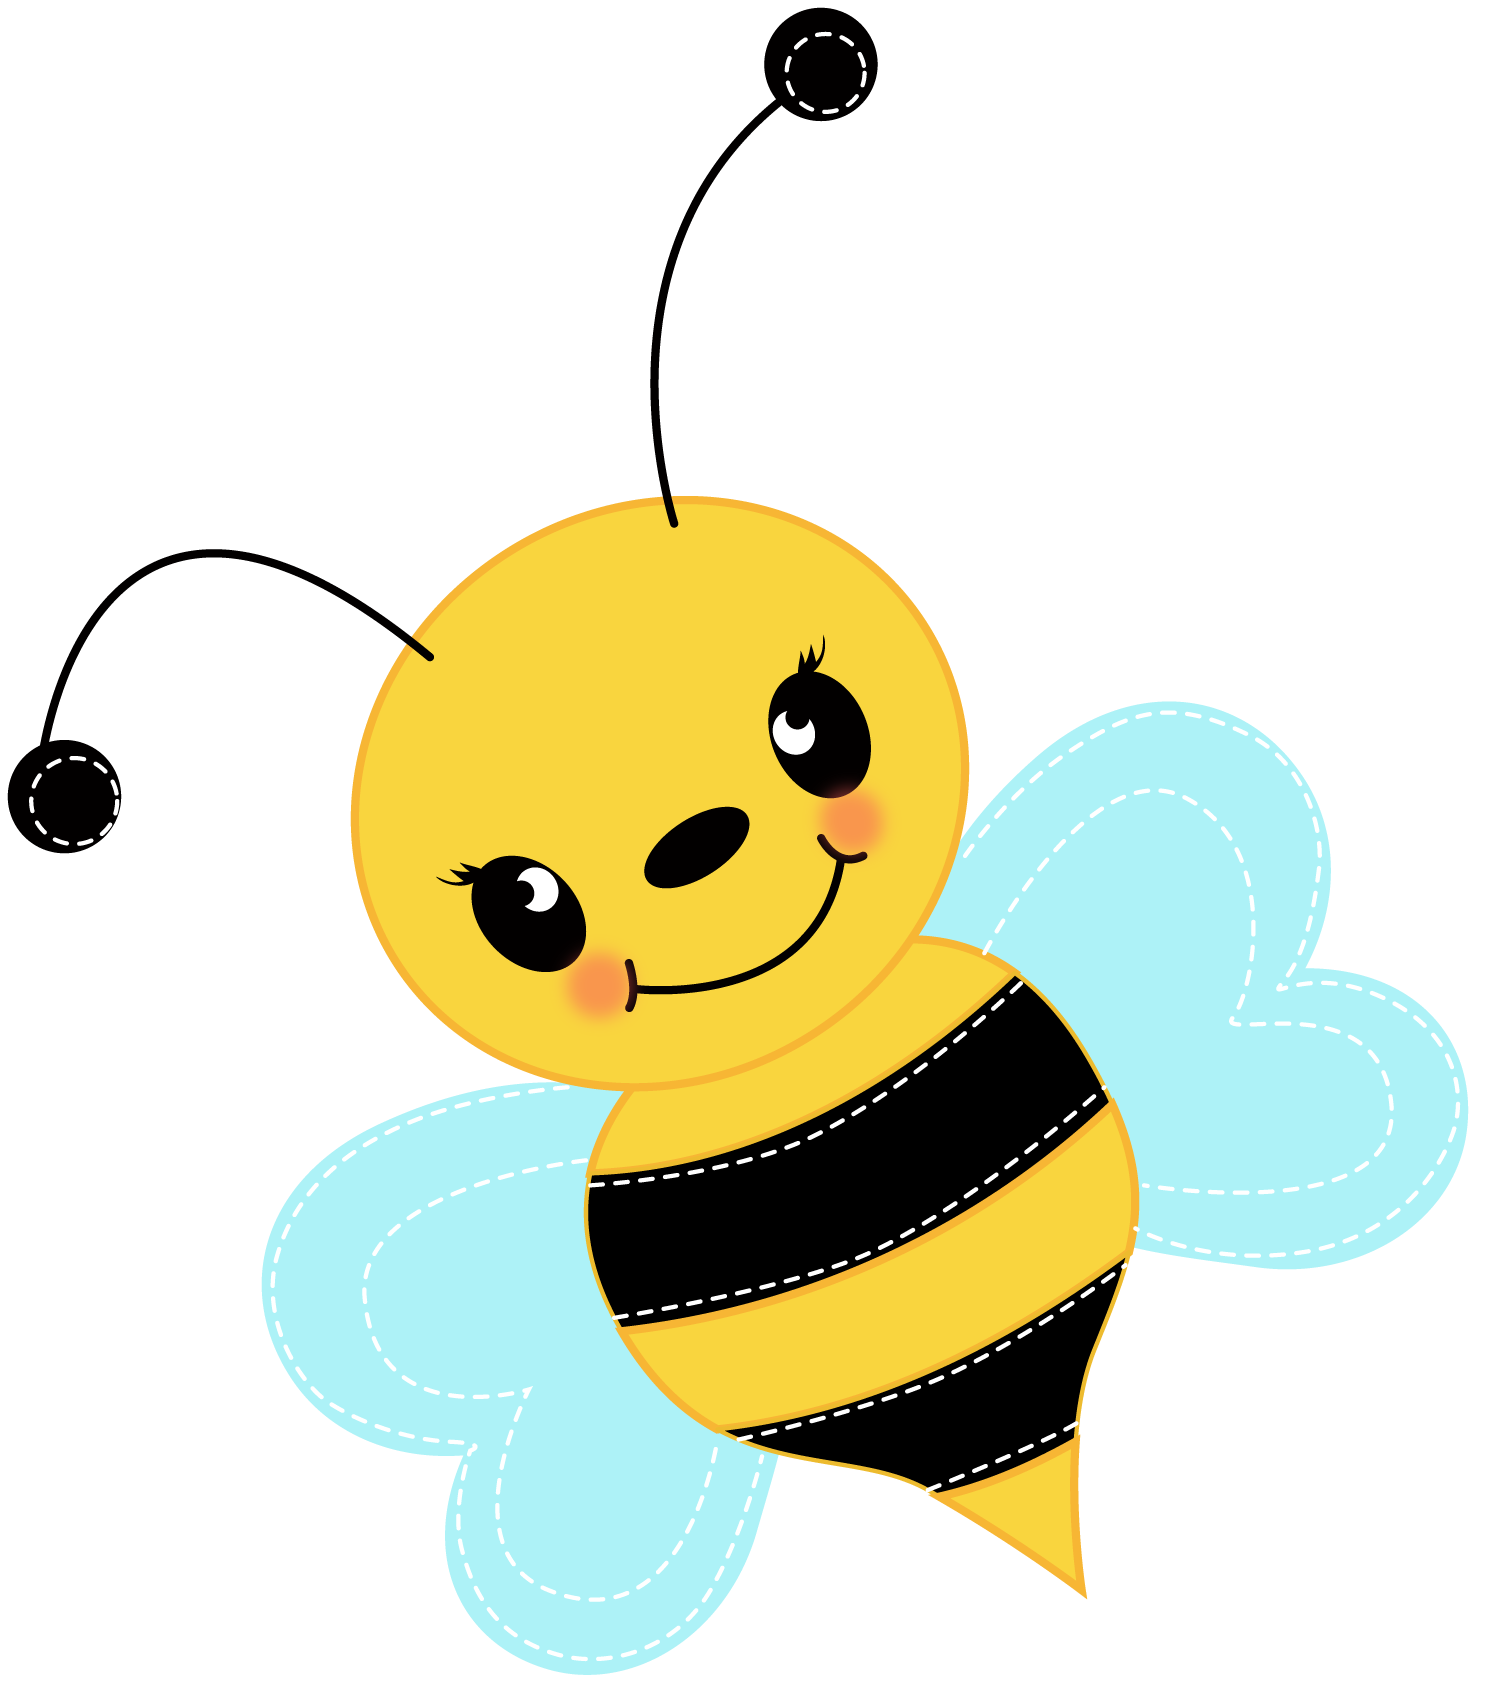 Bumble bee busy bee clipart free clipart images clipartix